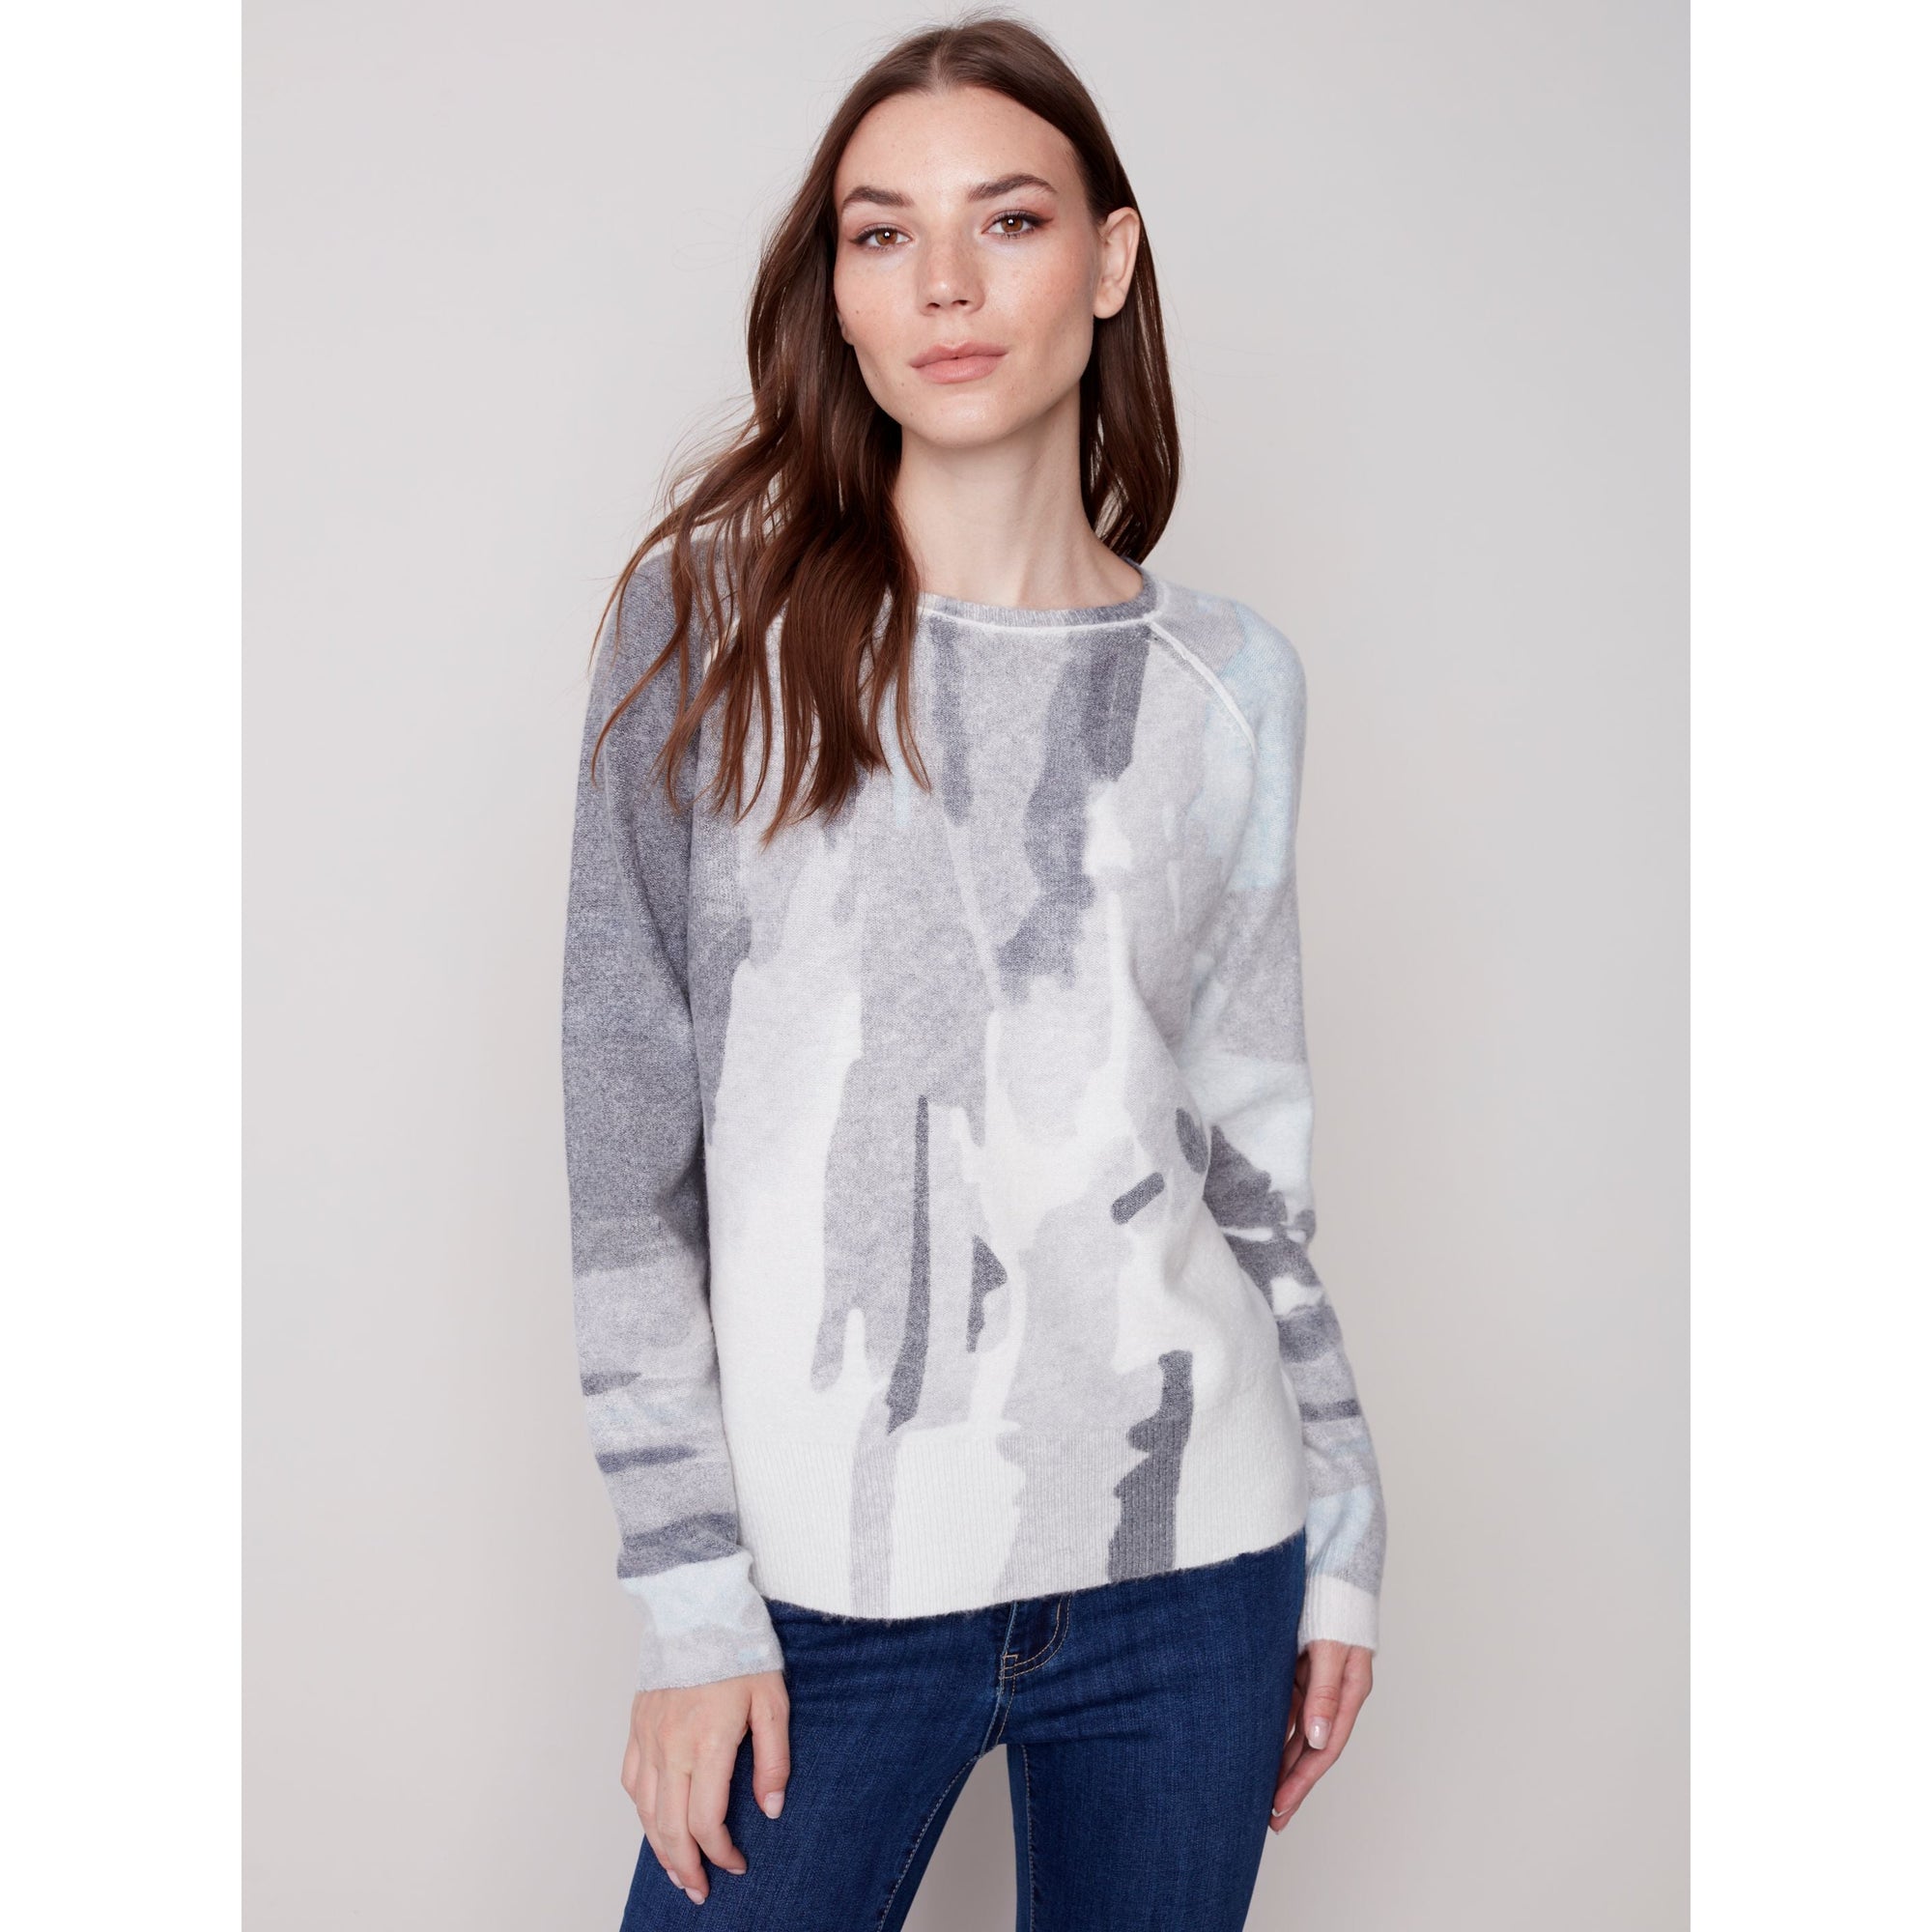 REVERSIBLE PRINTED SWEATER - CHARCOAL-Sweaters & Jackets-CHARLIE B-XSMALL-CHARCOAL-Coriander